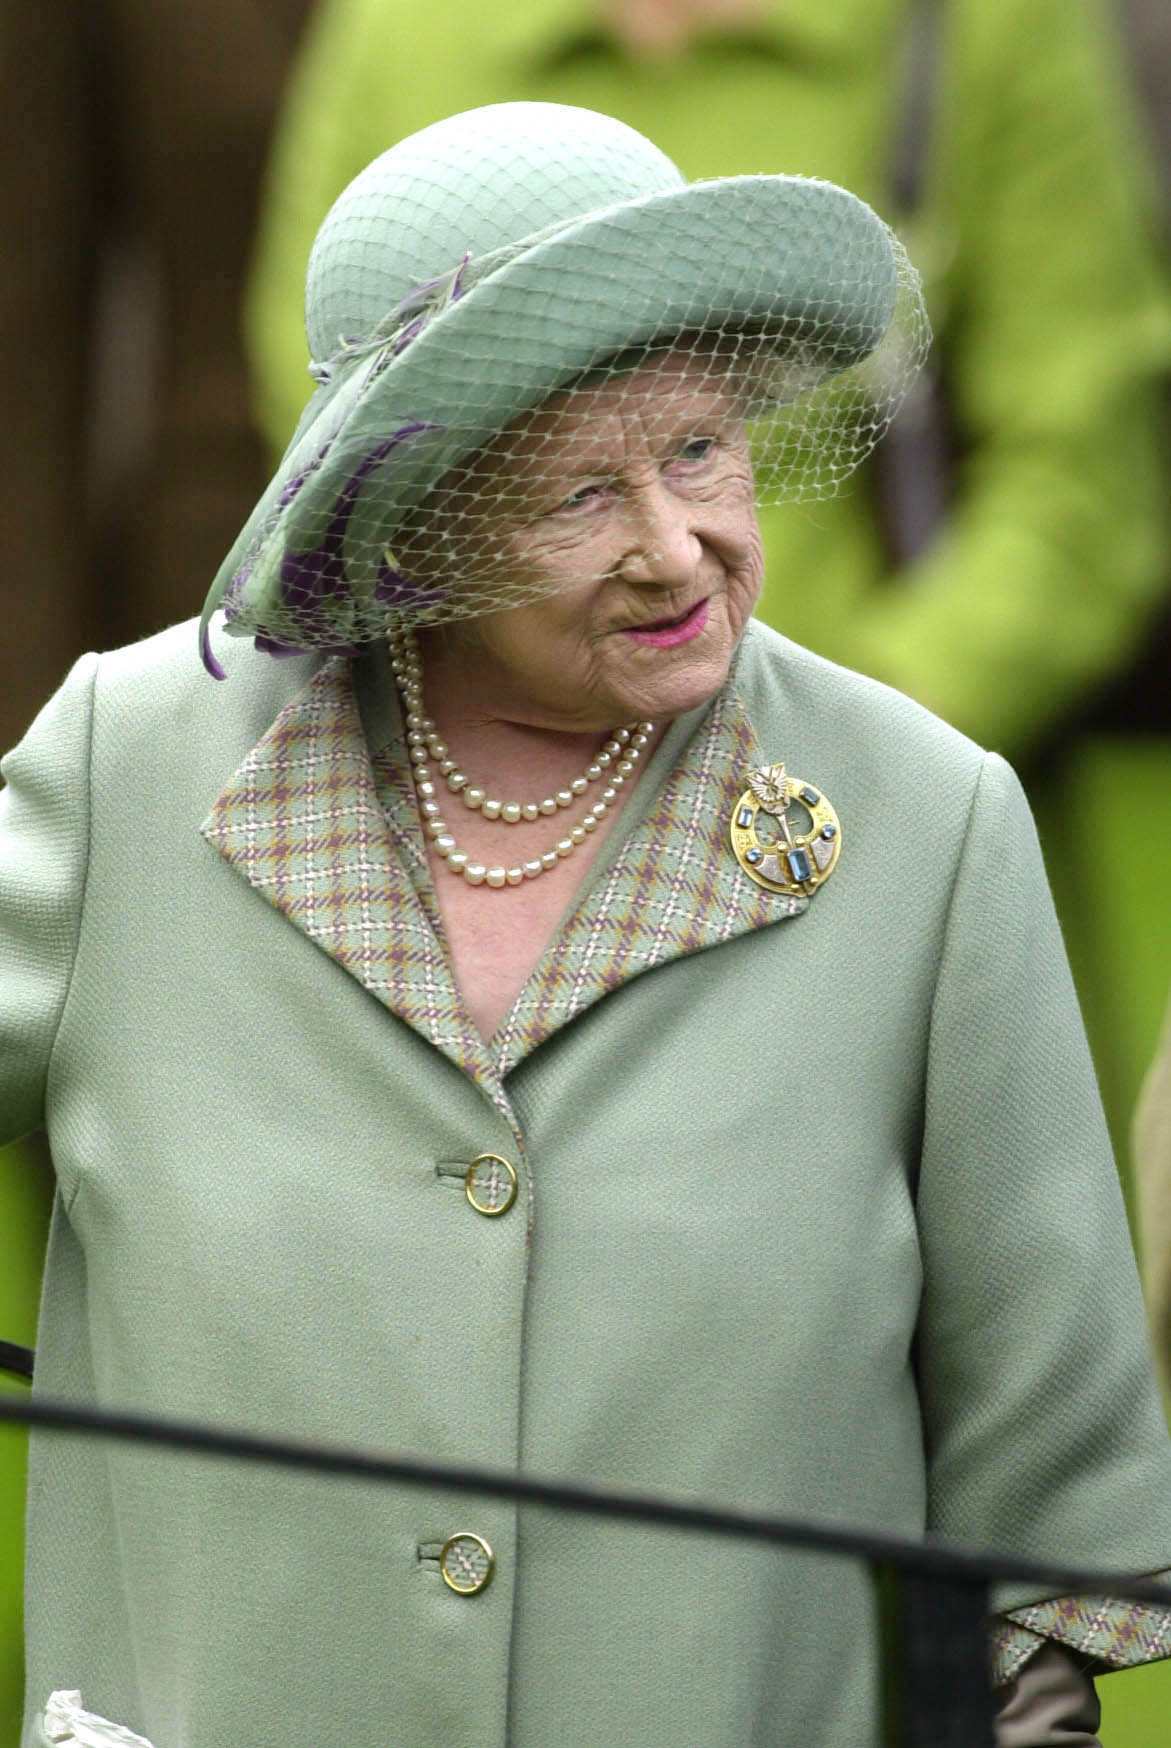 The Queen Mother during the Braemar gathering held in Scotland on September 2, 2000. | Source: Getty Images